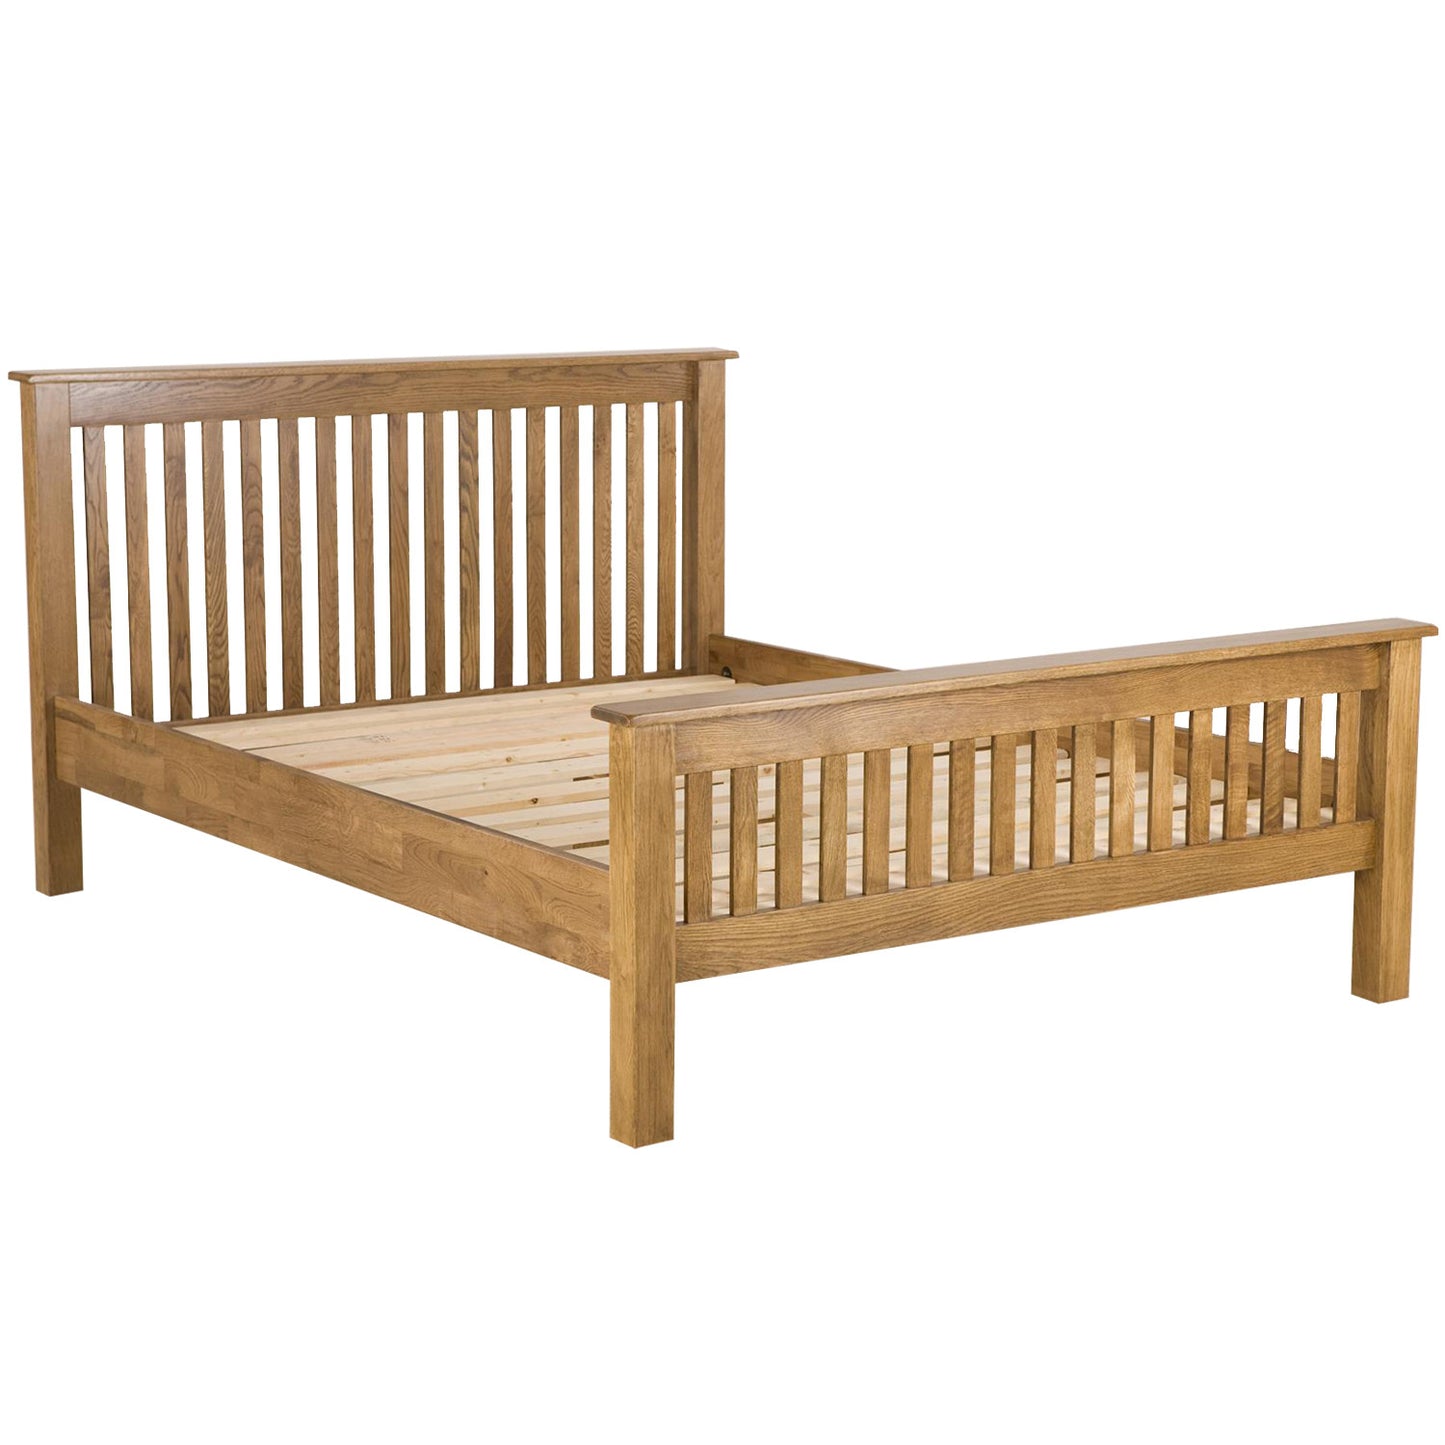 Auvergne Solid Oak Bed - 4ft6 (135cm) Double High Foot End - Better Furniture Norwich & Great Yarmouth